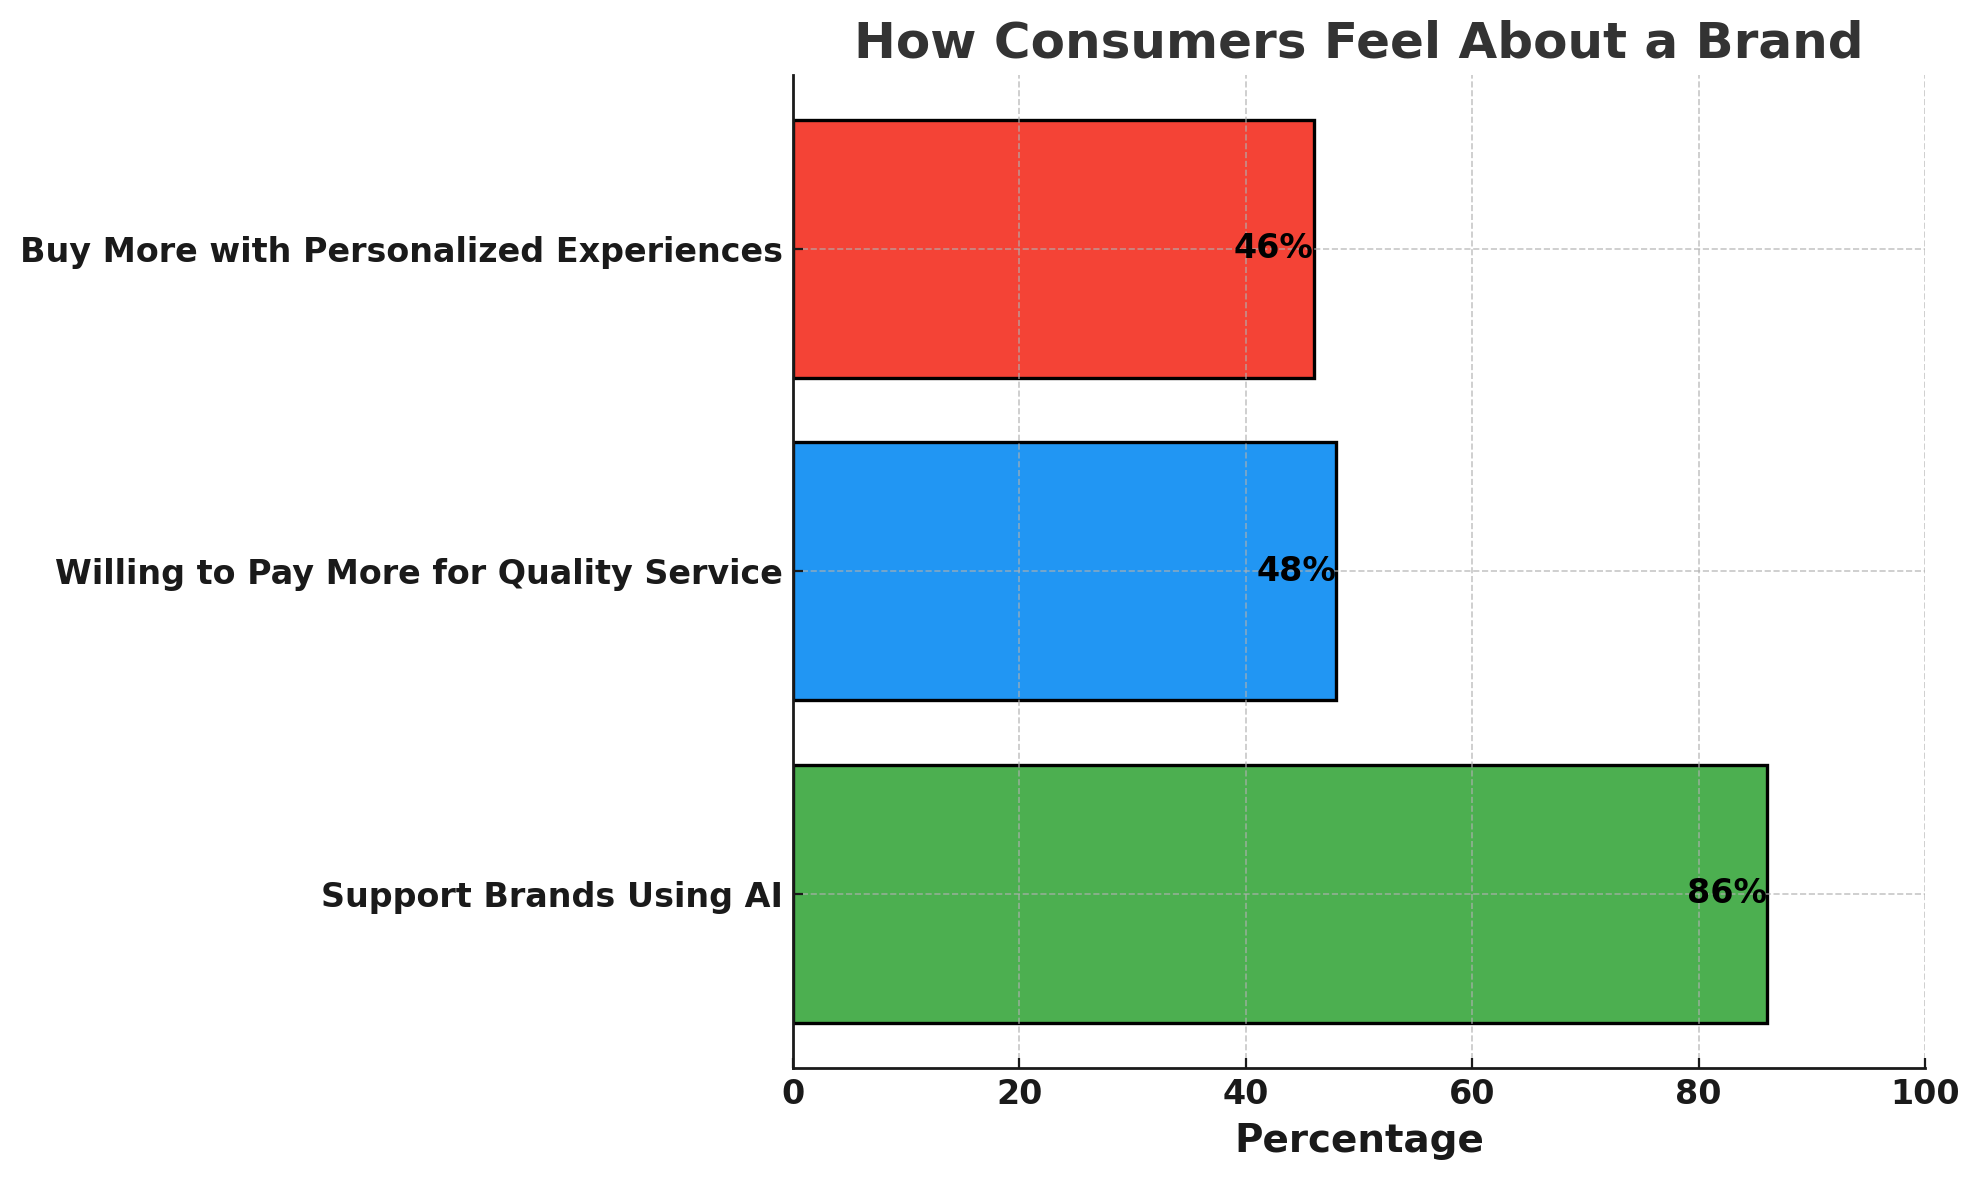 How consumers feel about a brand